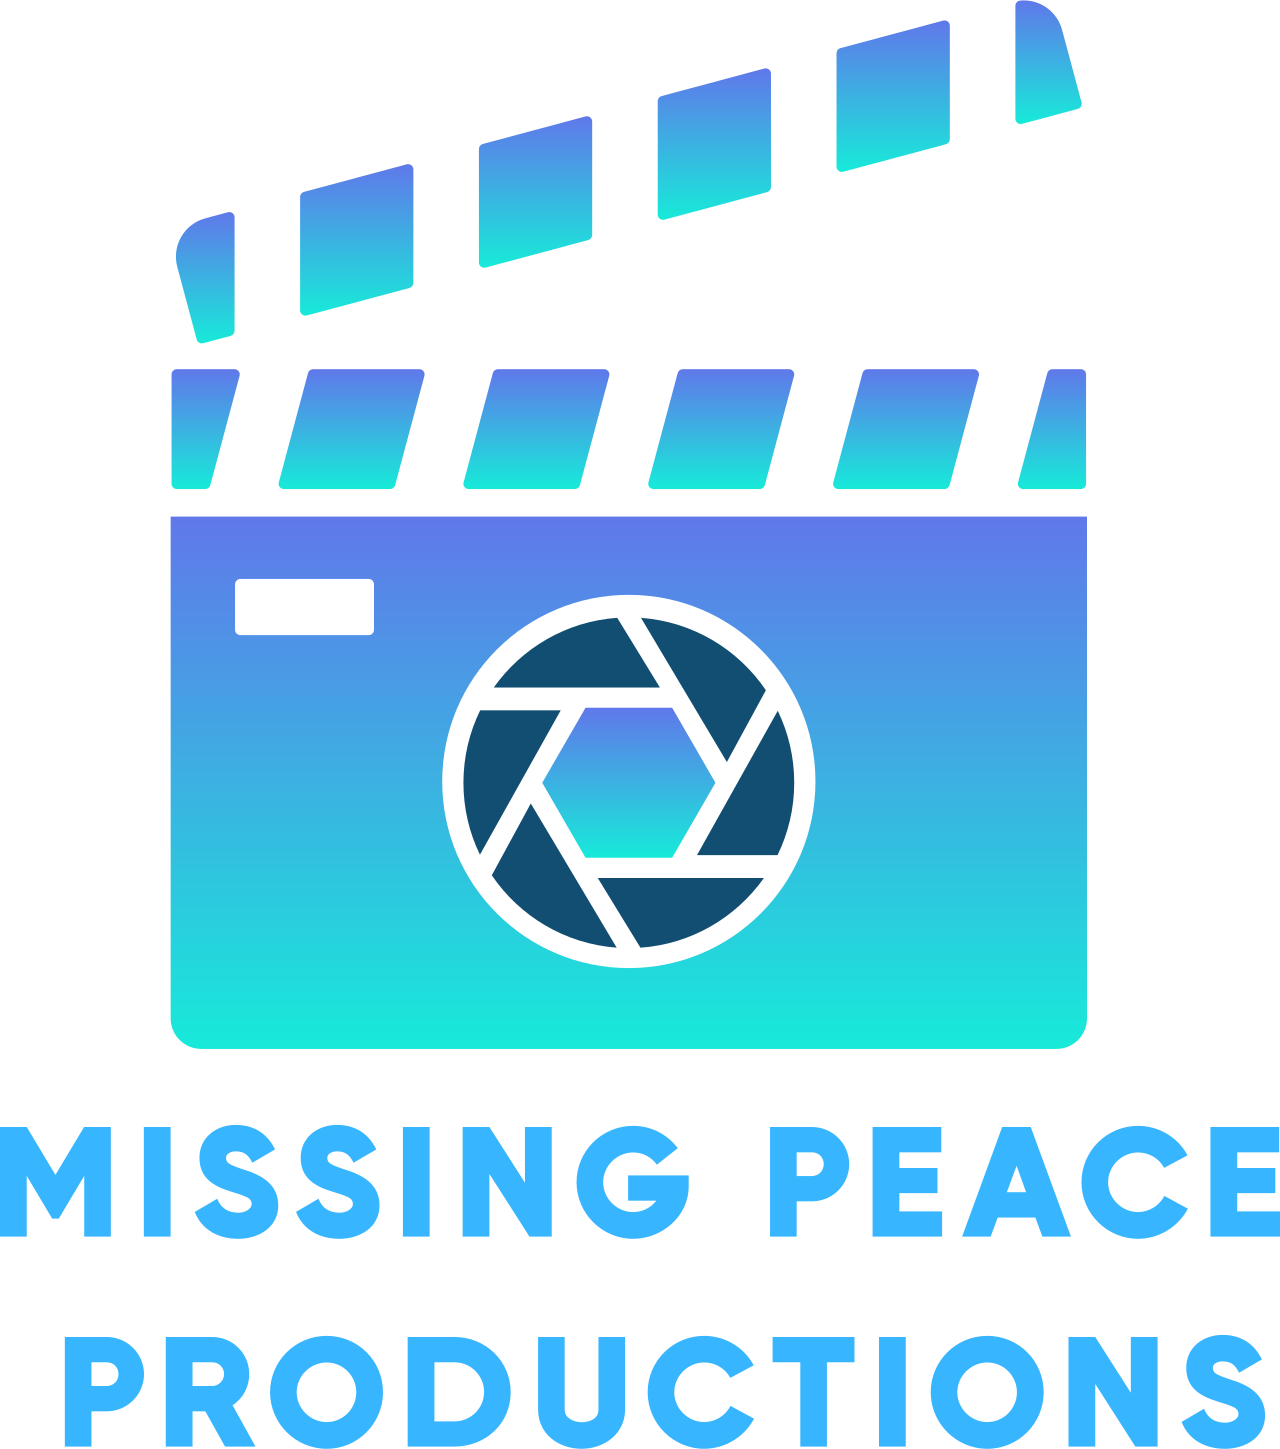 MISSING PEACE PRODUCTIONS